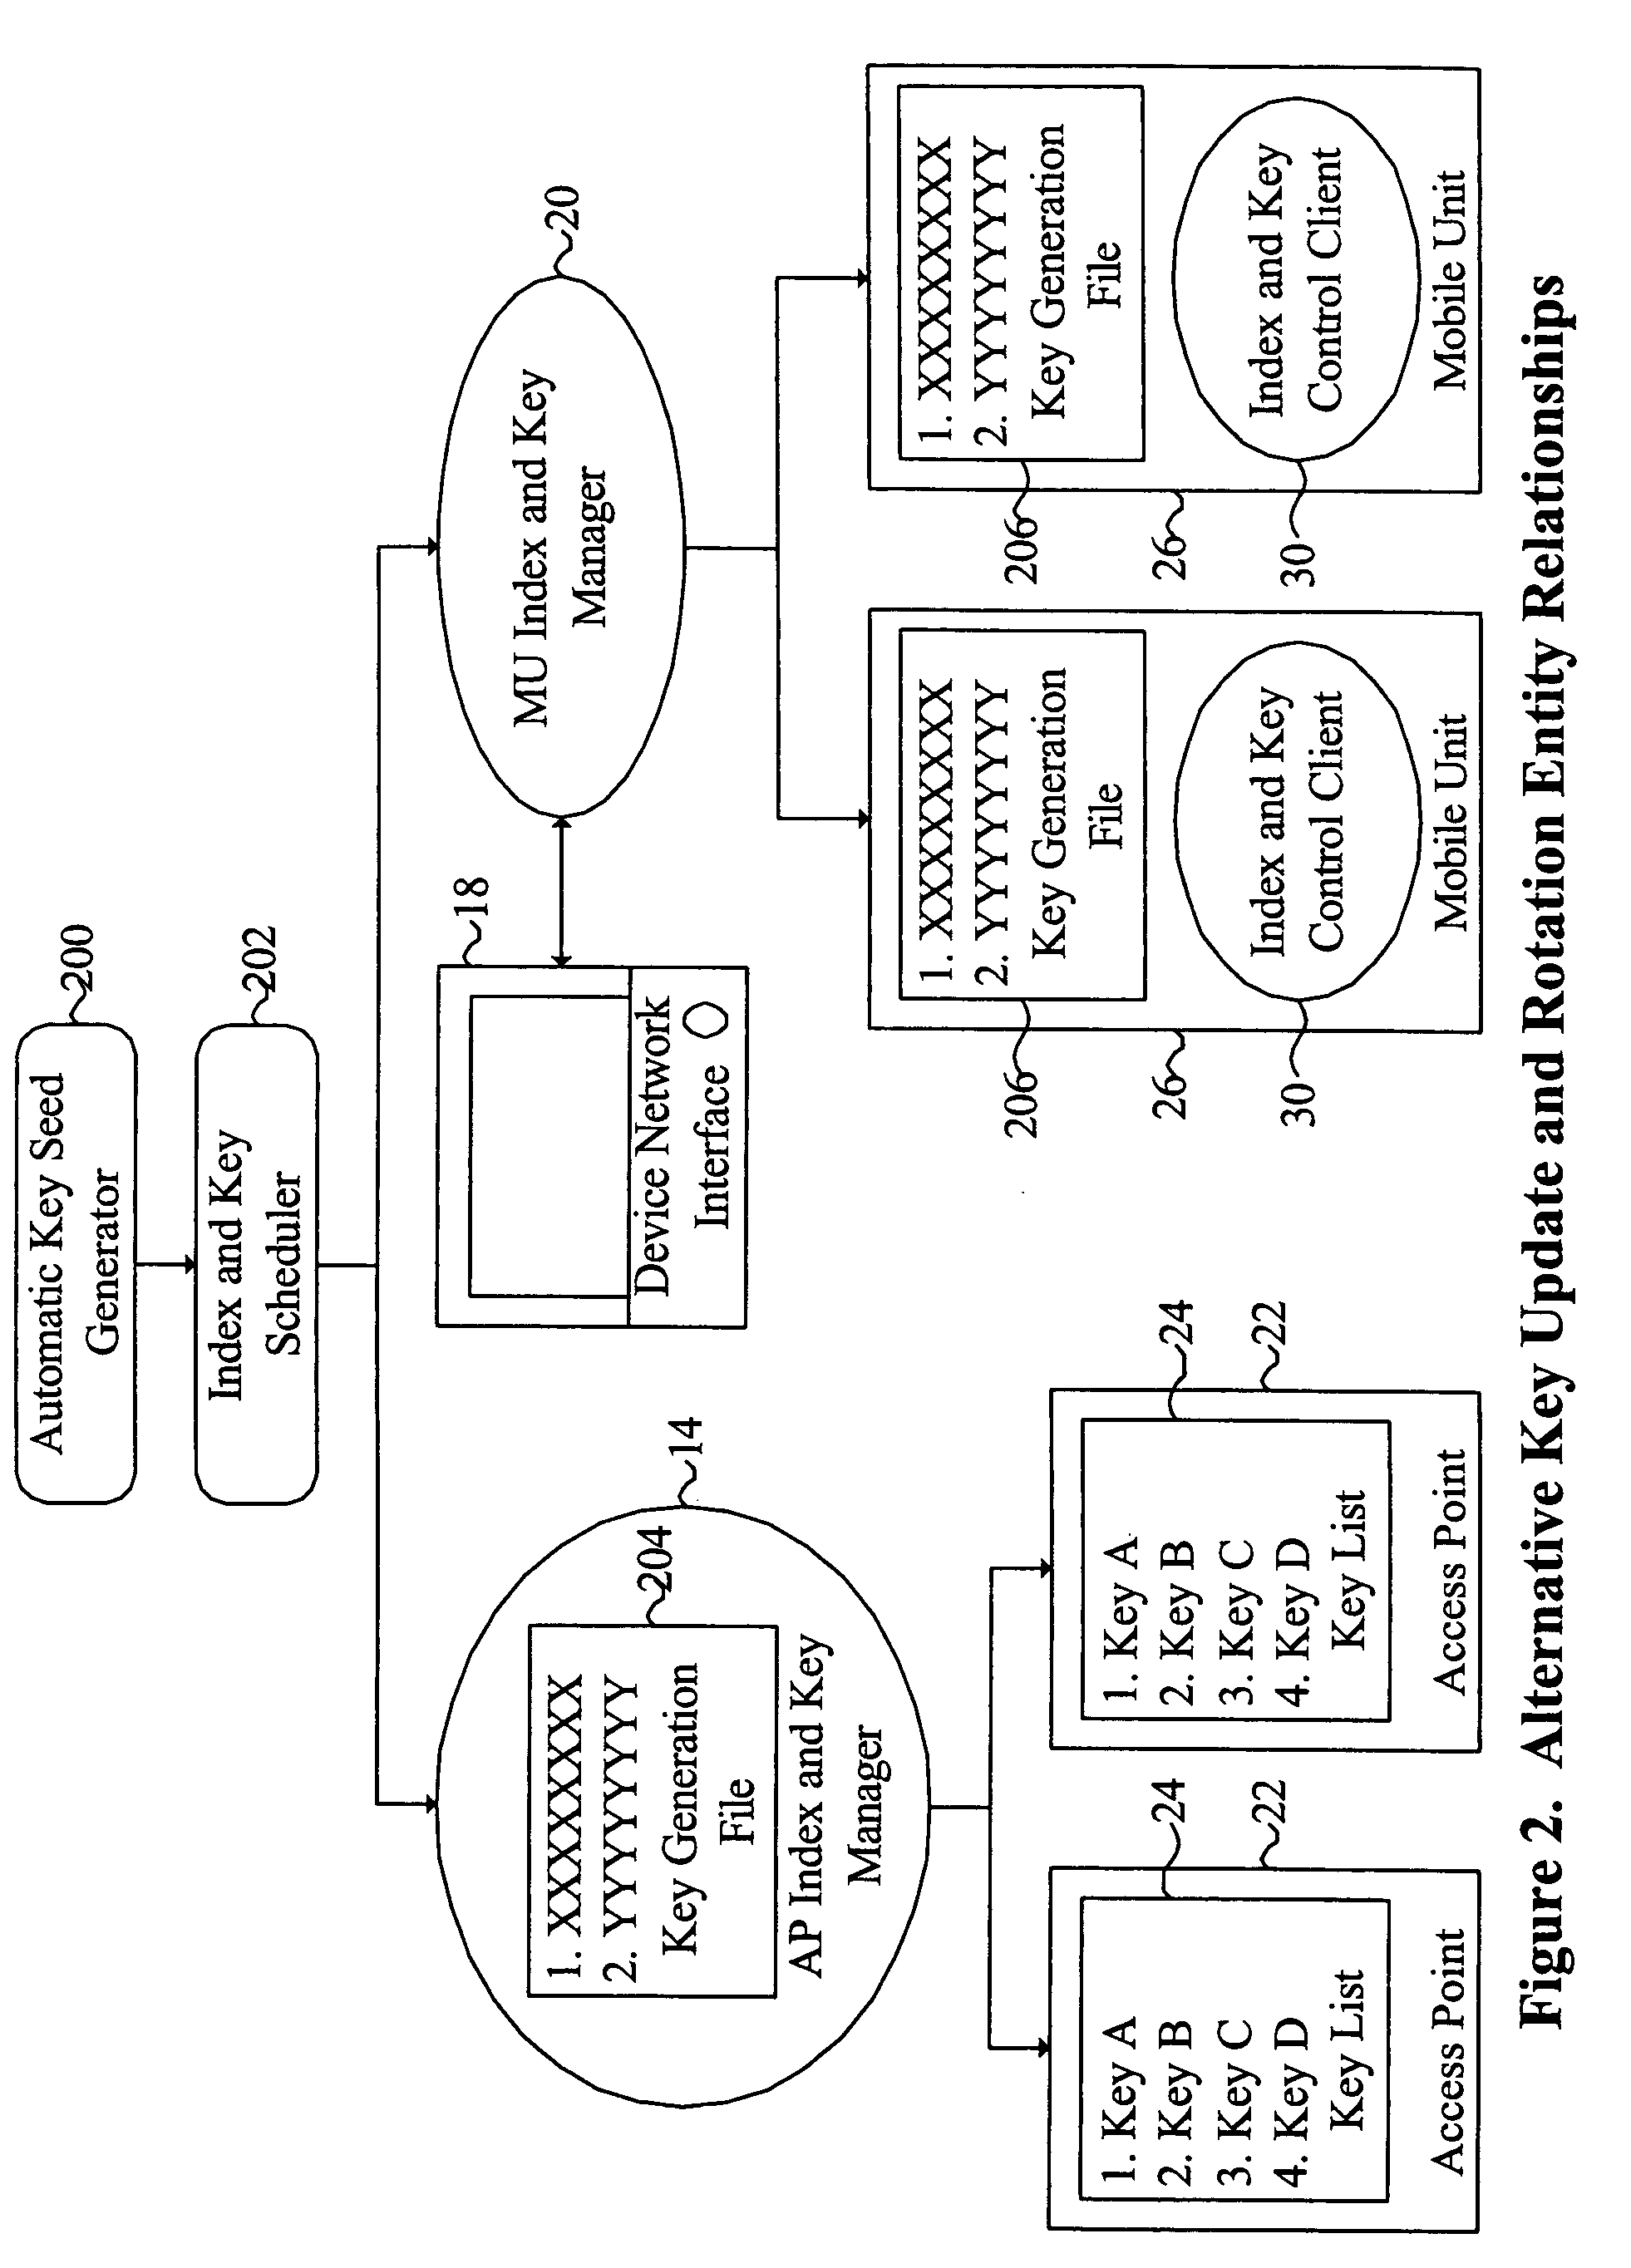 System and method for providing WLAN security through synchronized update and rotation of WEP keys